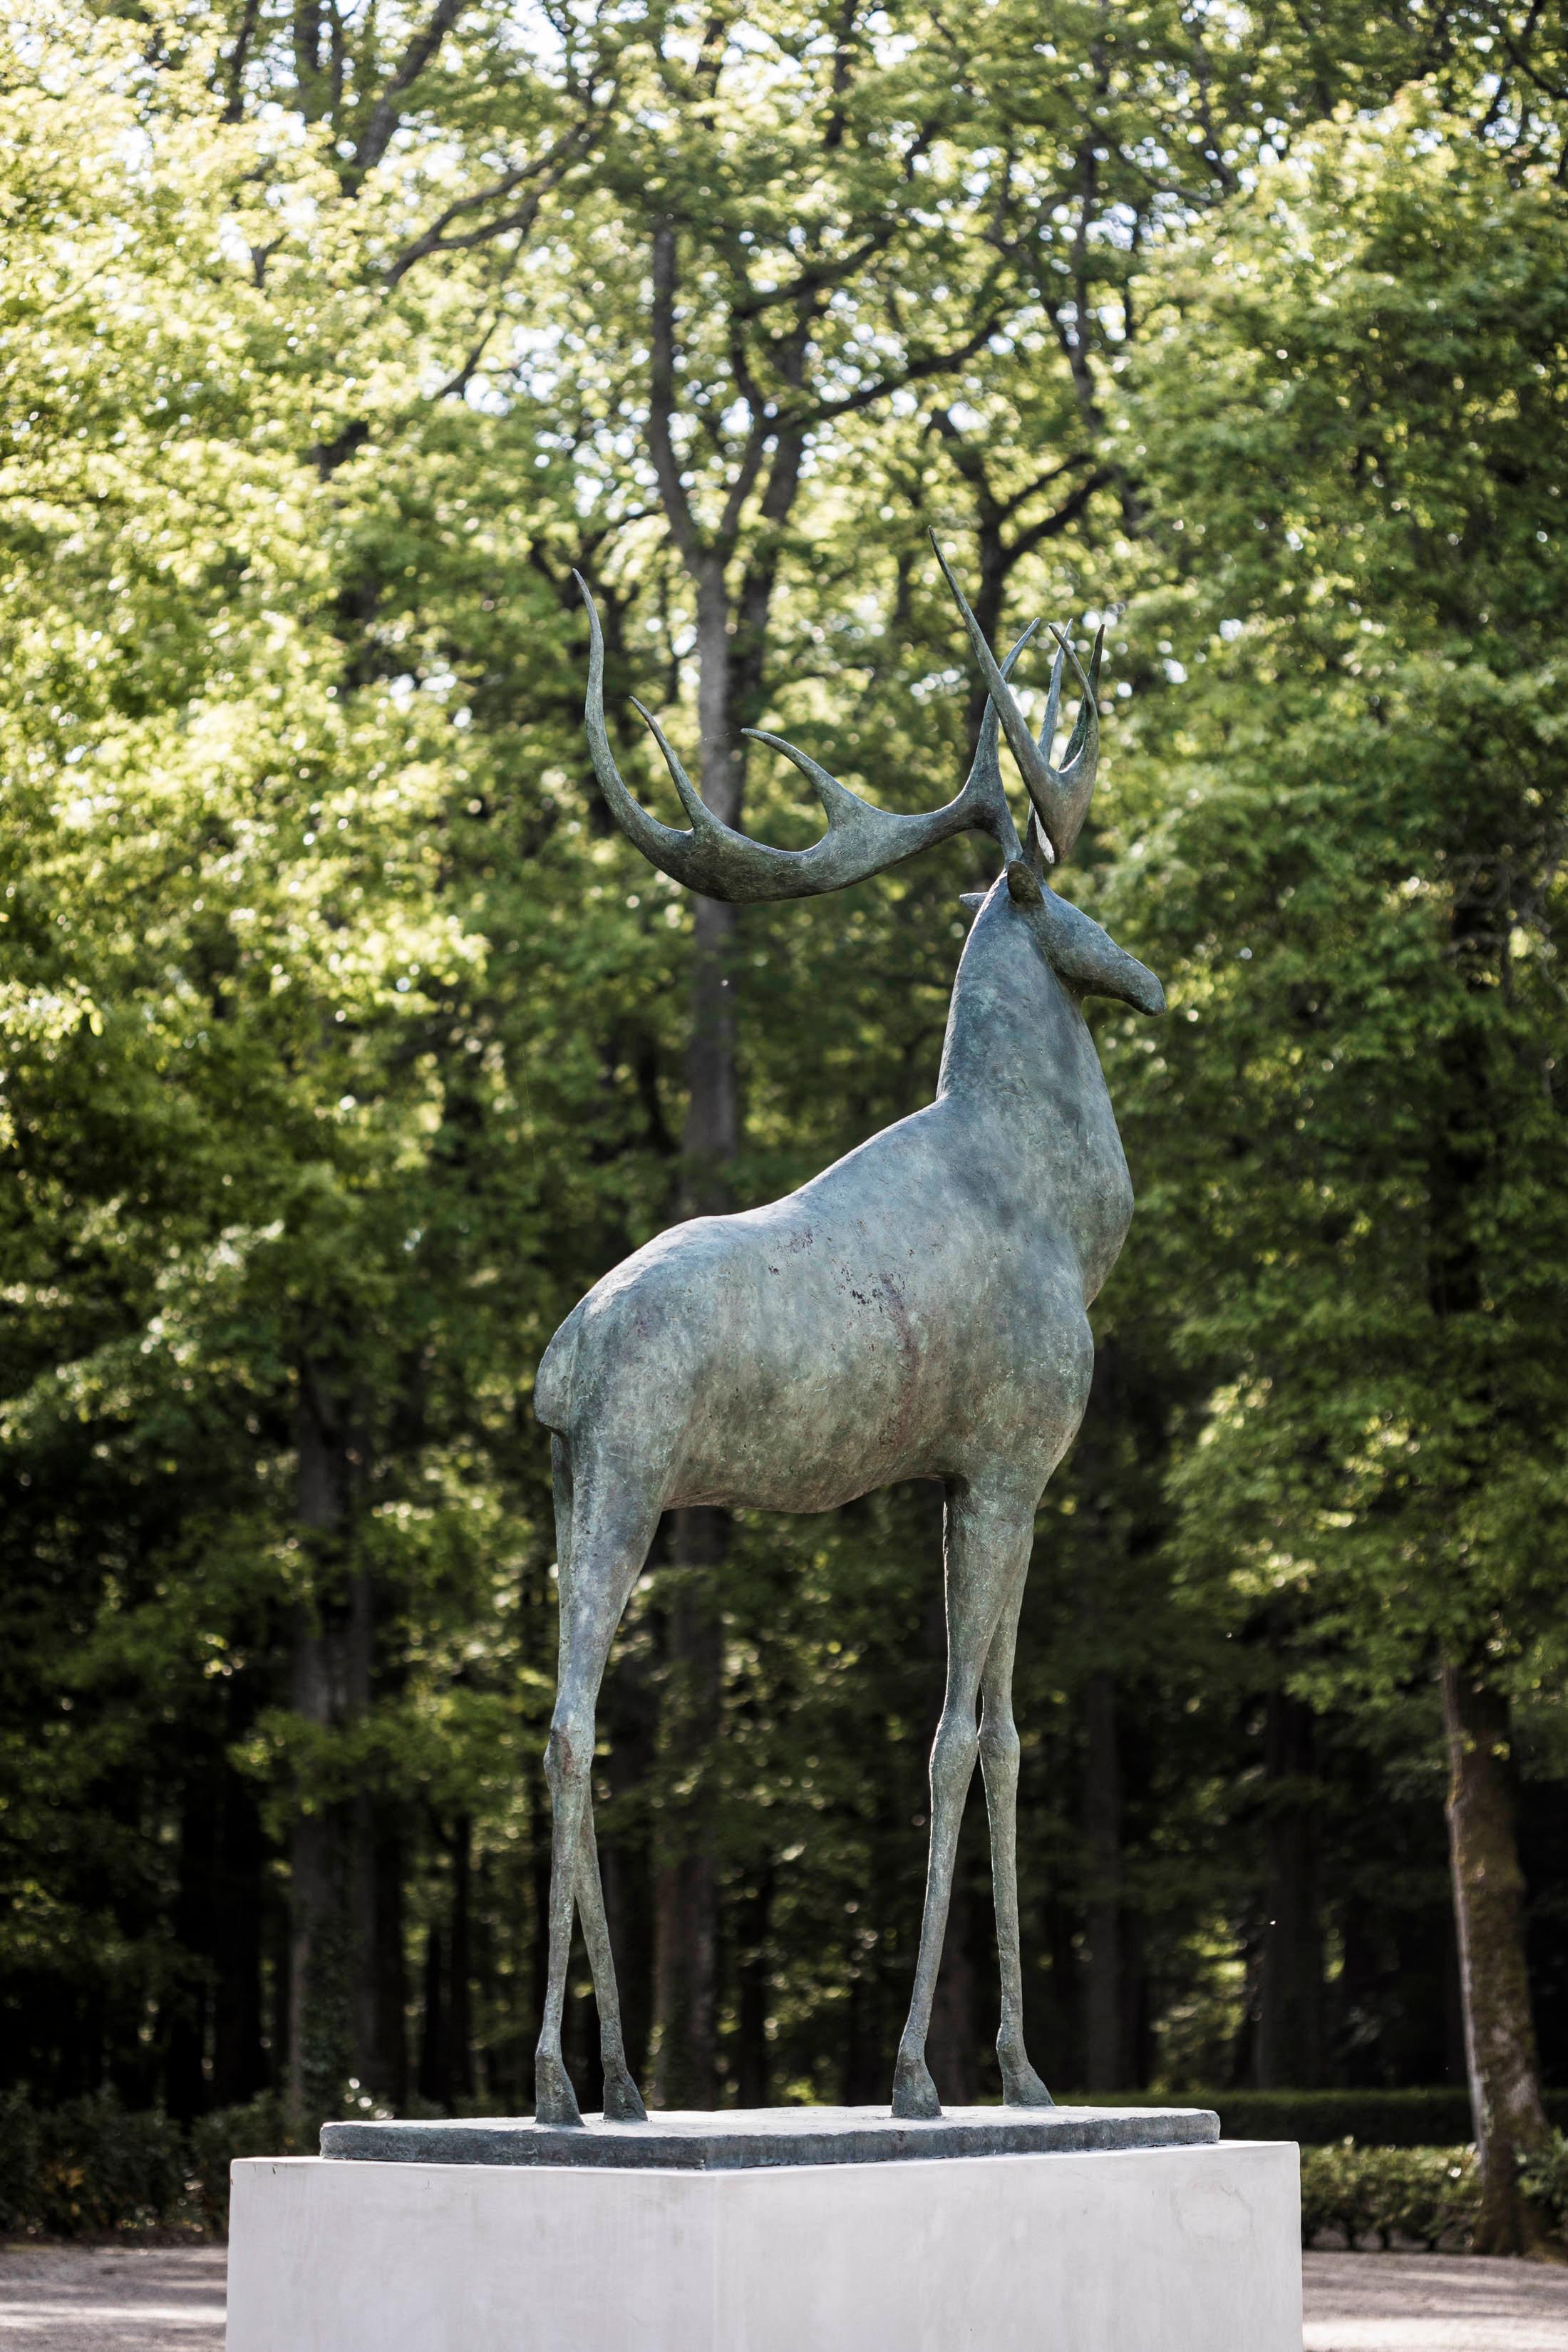 Grand Cerf (Great Stag) is a monumental bronze sculpture by French contemporary artist Pierre Yermia.
The strength of the stag's body and its slender legs bestow it with a contradictory silhouette of the greatest elegance. In true fashion, the